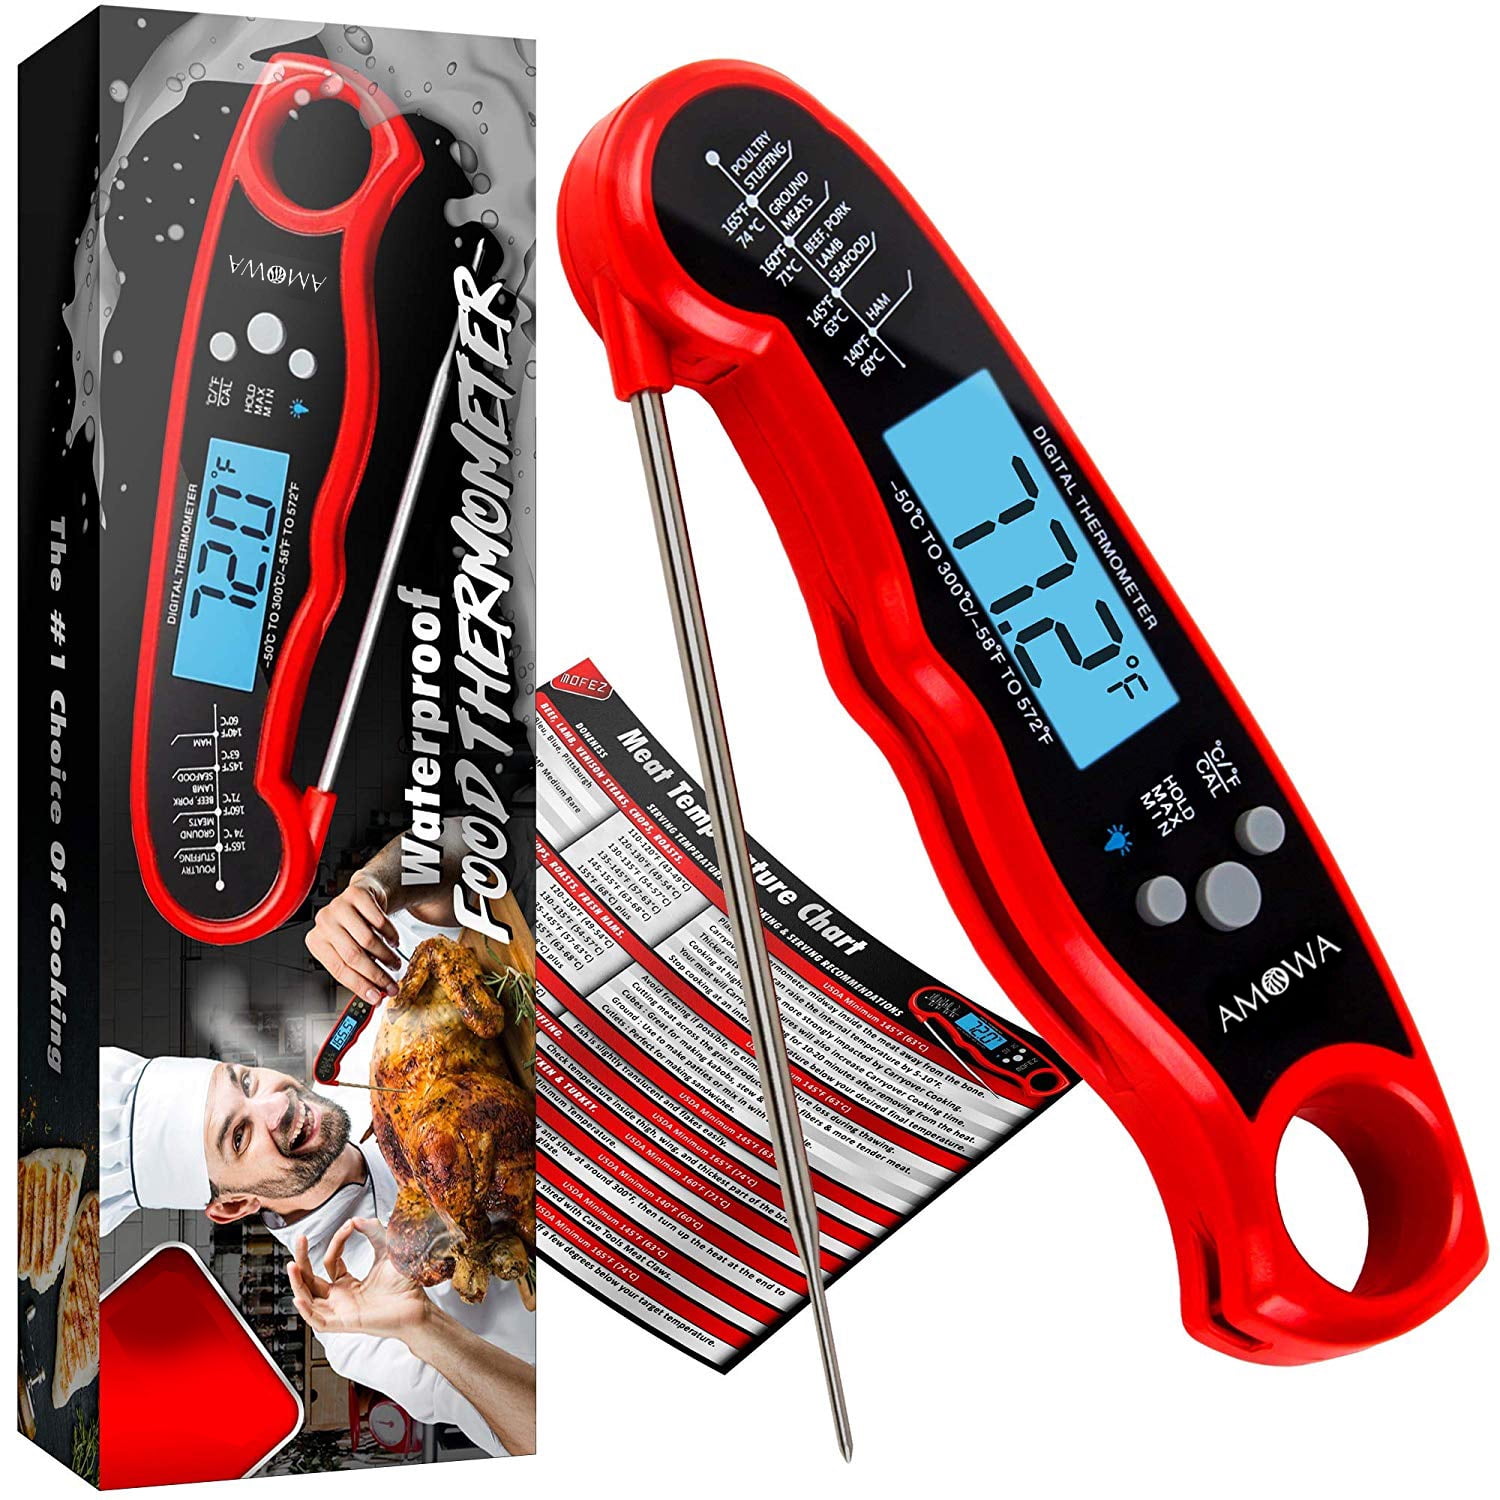 Great for Steaks & BBQ. Instant Read MASTERCLASS Digital Pocket Thermometer 